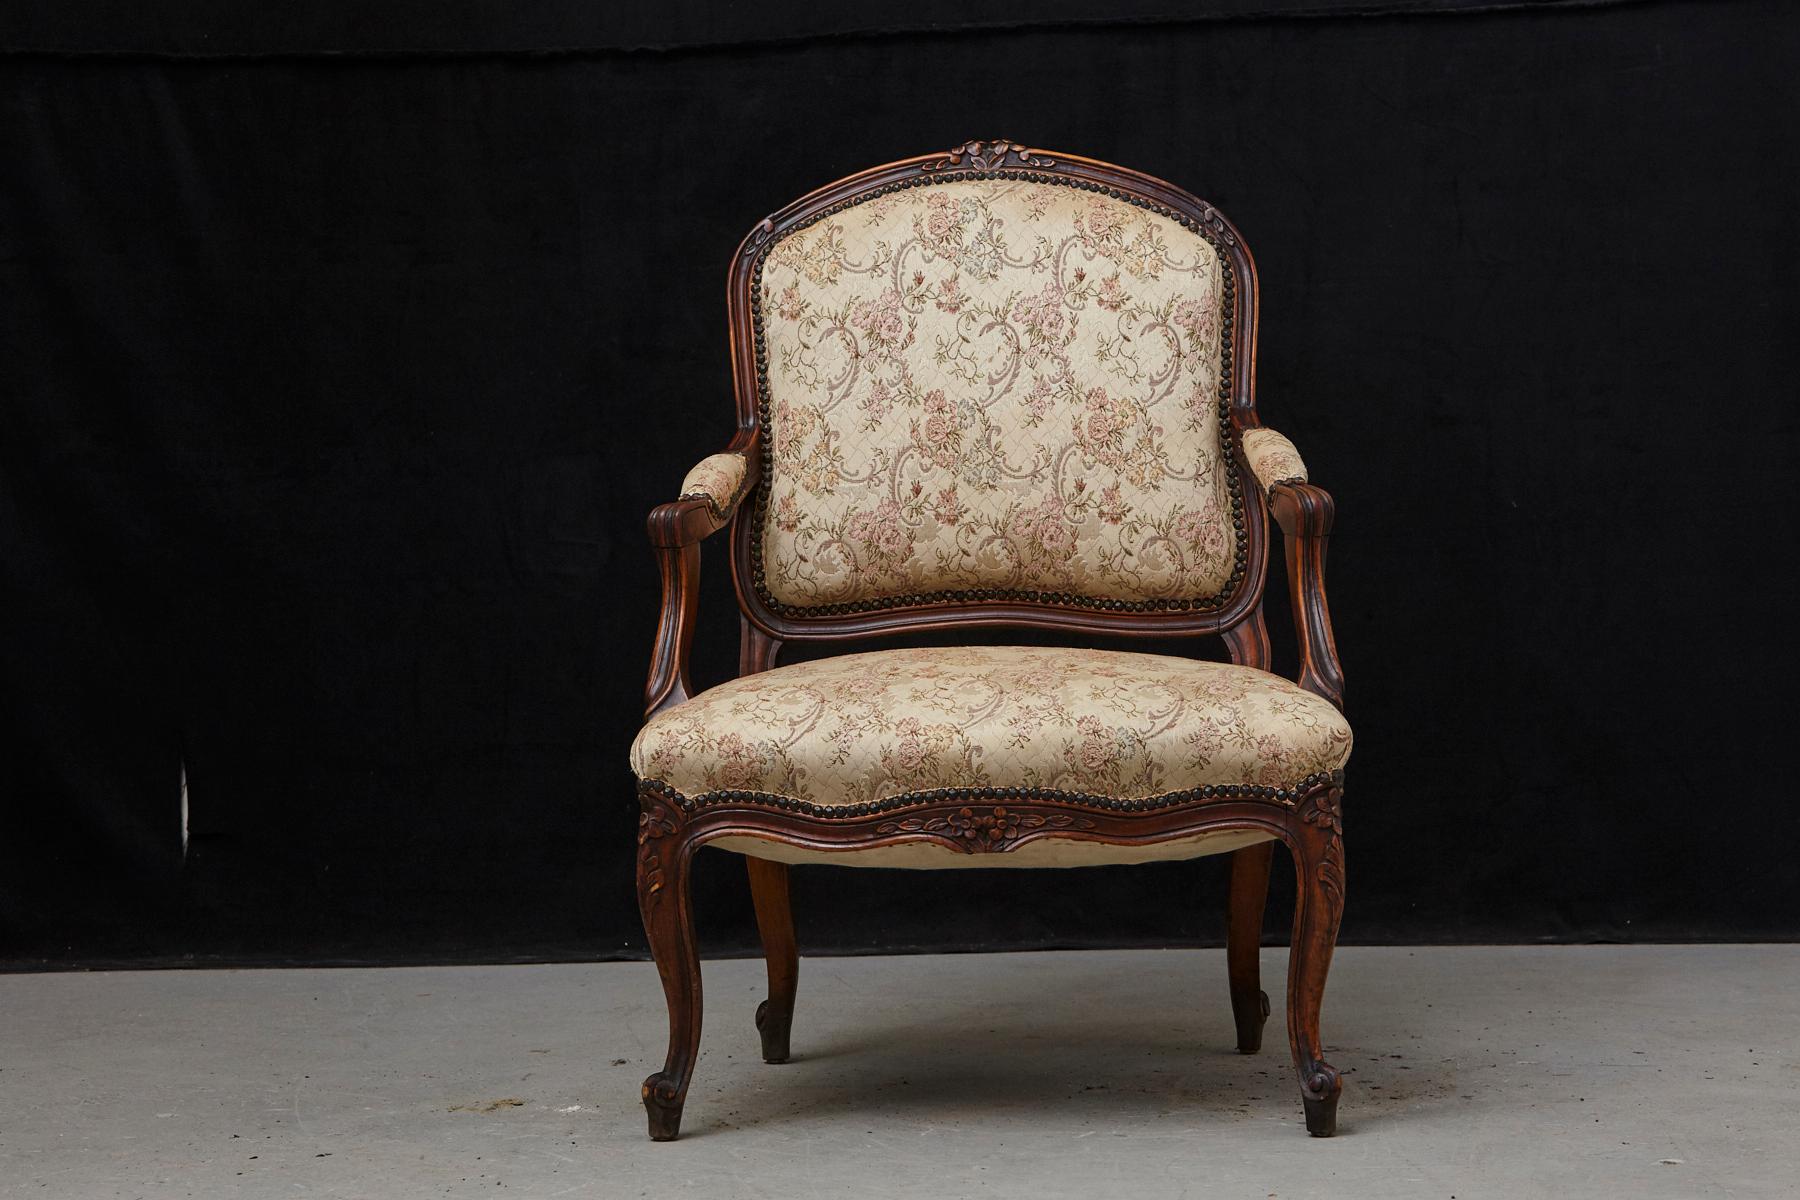 Lovely French Provincial Louis XV style walnut fauteuil, covered in nailhead trimmed fabric, with confirming armrests. The arms with voluted supports, carved apron, the whole raised on cabriole legs, circa 1930s
Some minor stains on the seat,